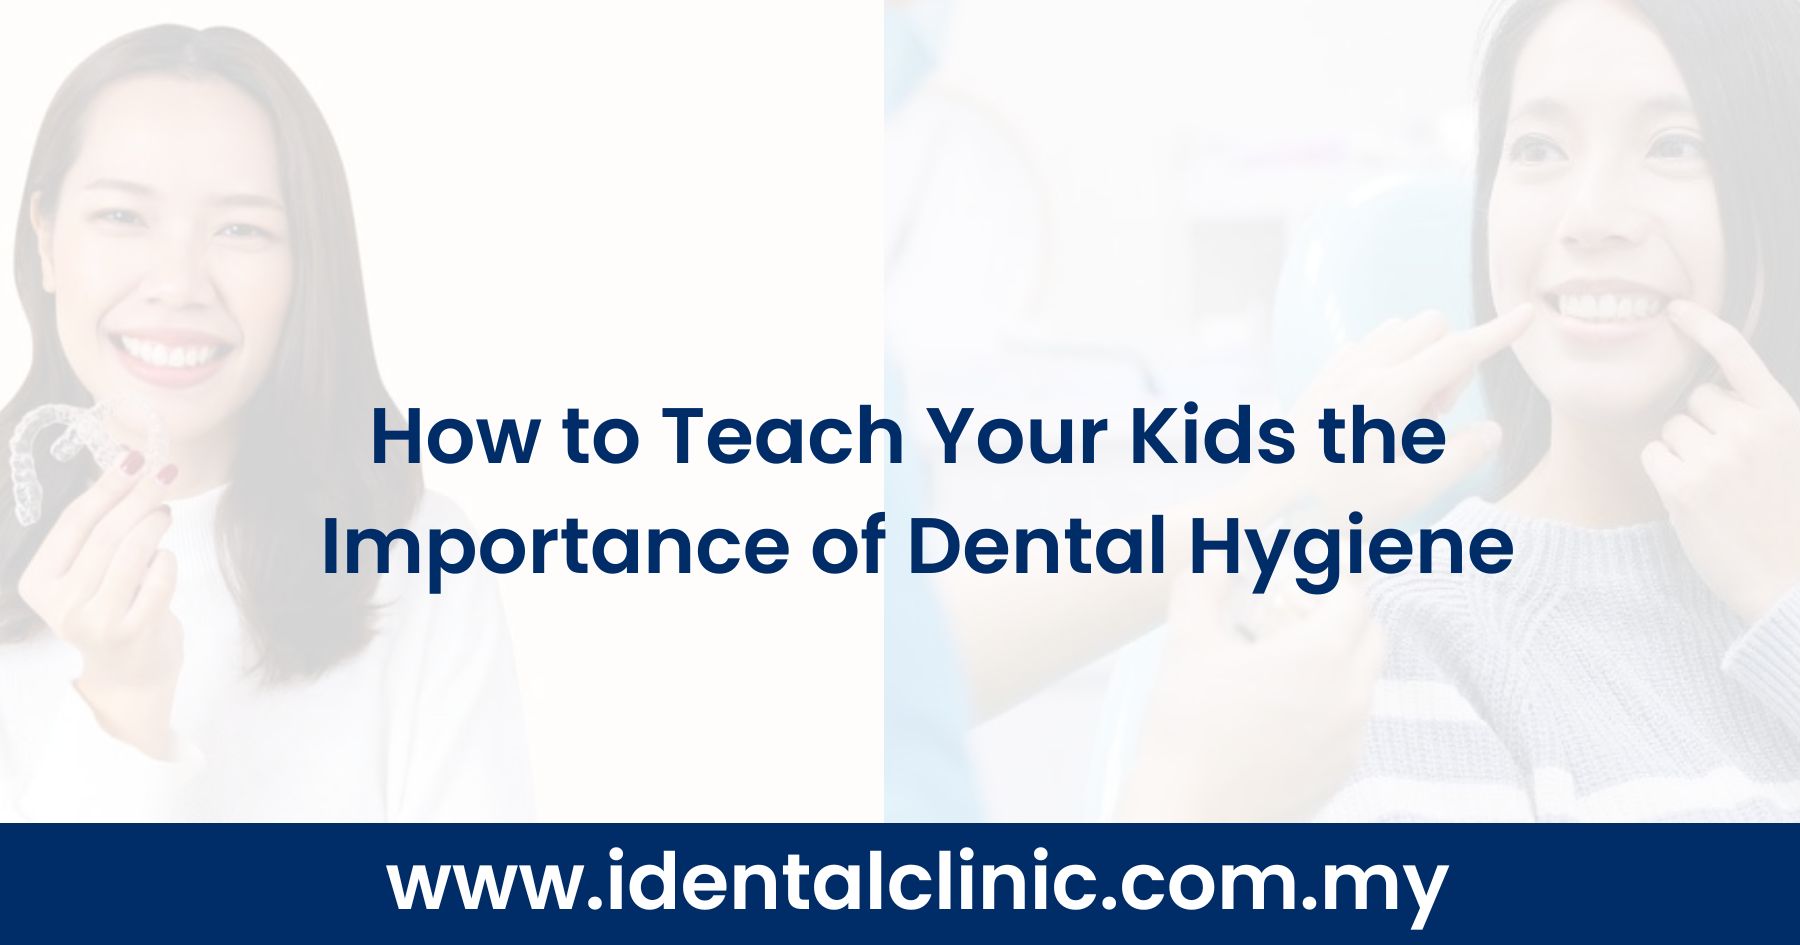 How to Teach Your Kids the Importance of Dental Hygiene